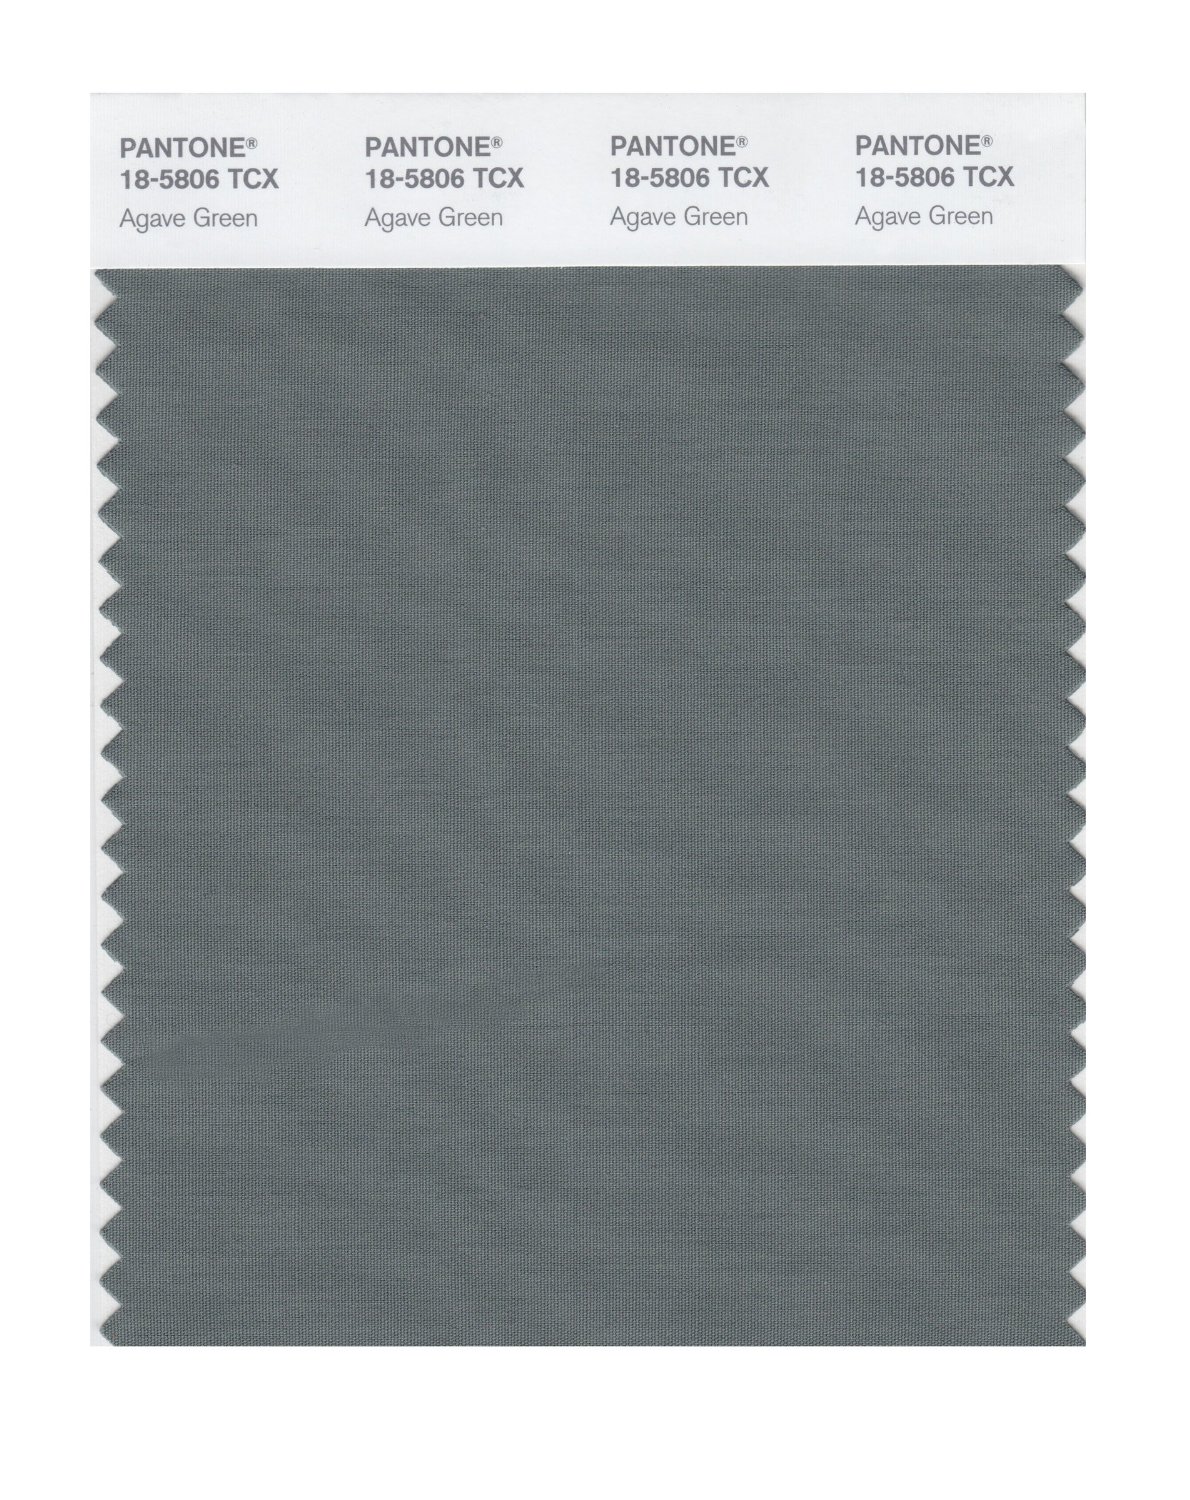 Pantone Cotton Swatch 18-5806 Agave Green